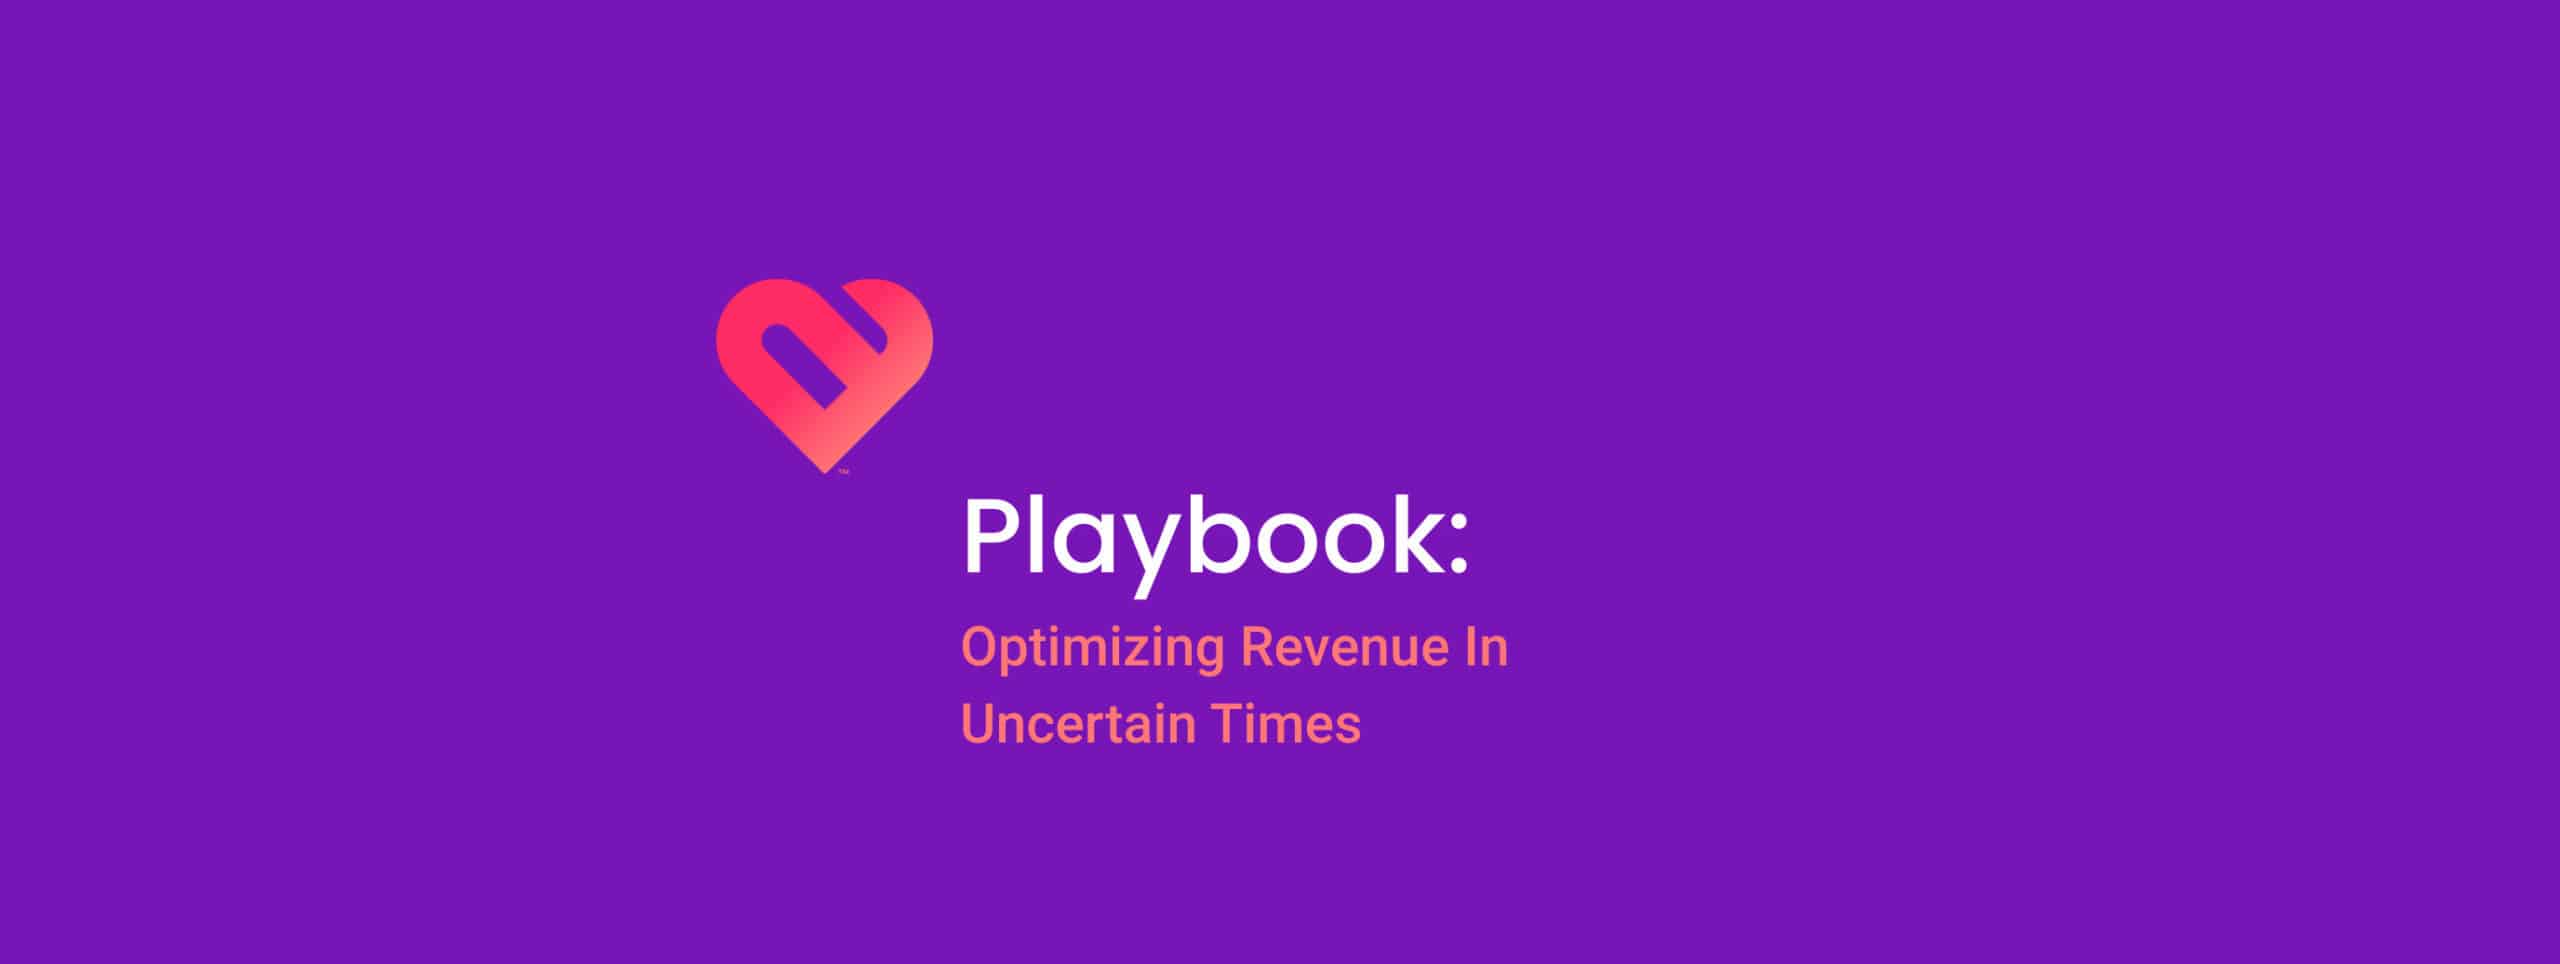 Playbook Optimizing Revenue In Uncertain Times-High-Quality